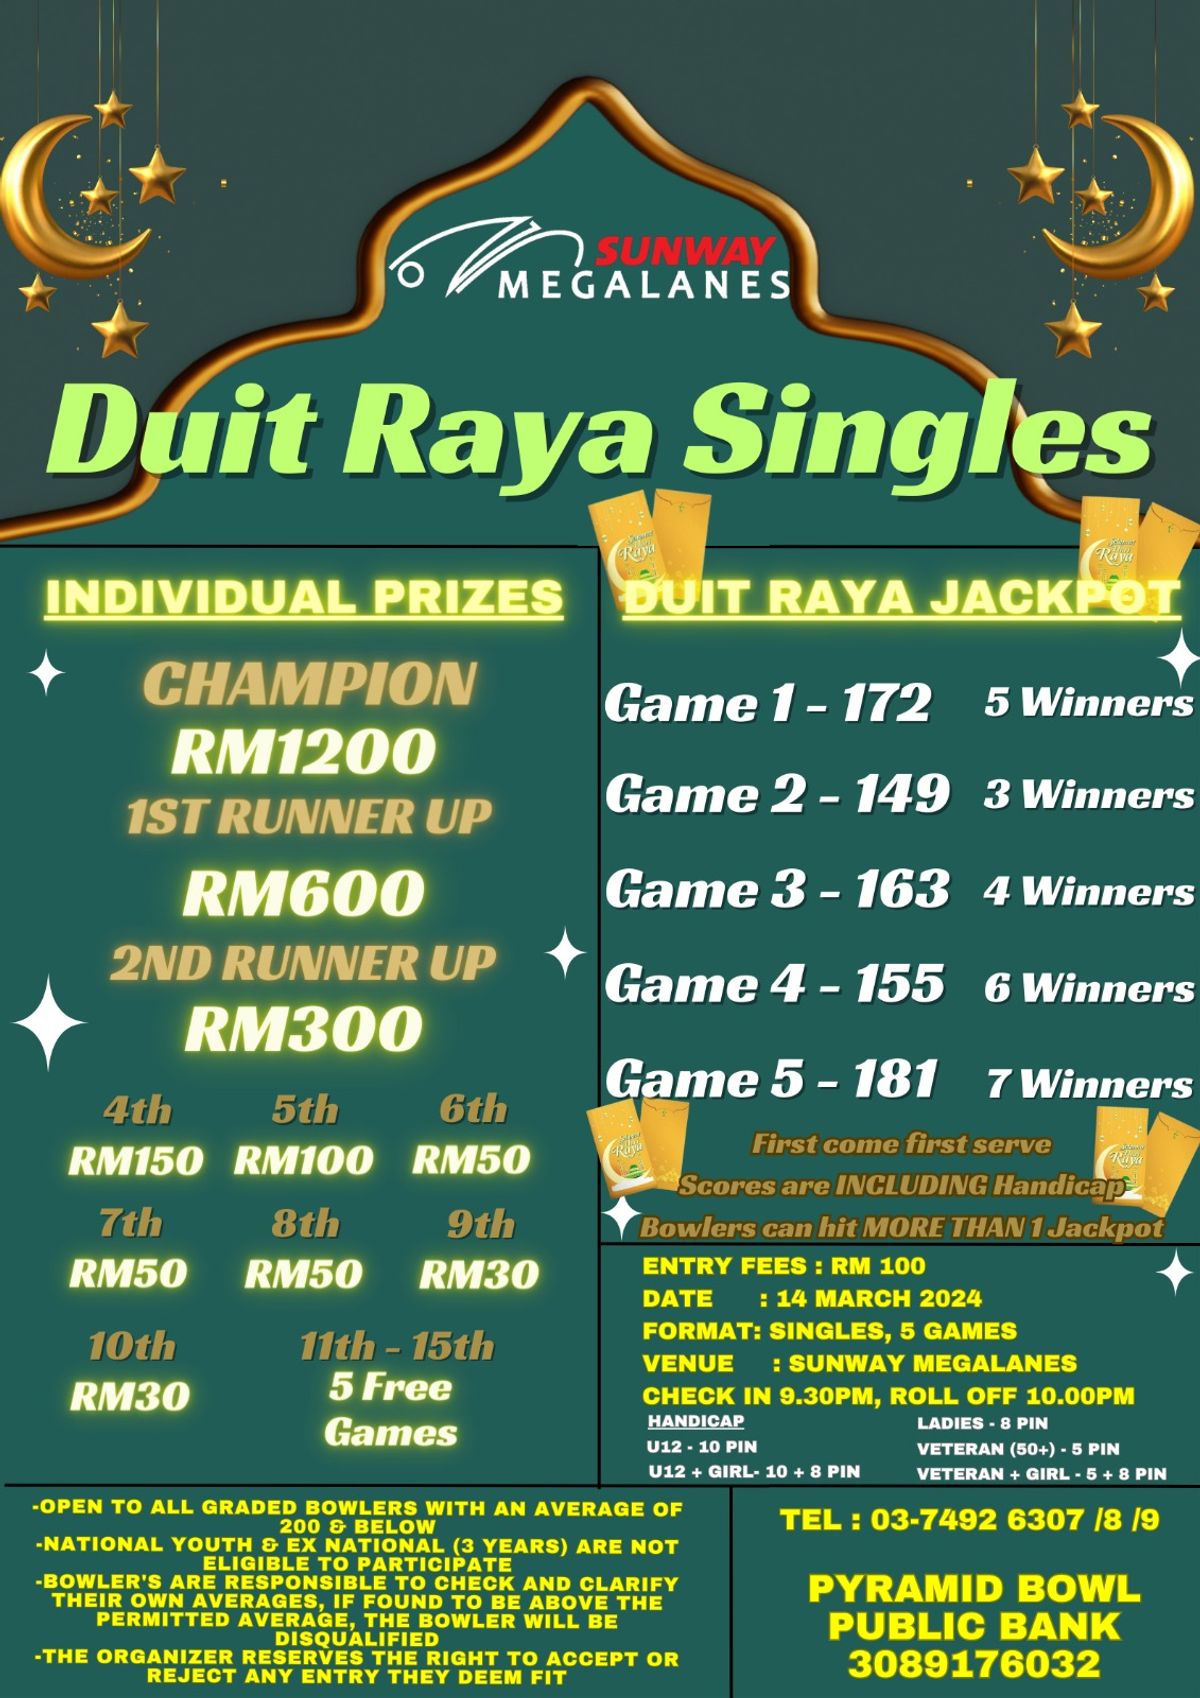 Duit Raya Challenge commences on 14th March 2024!